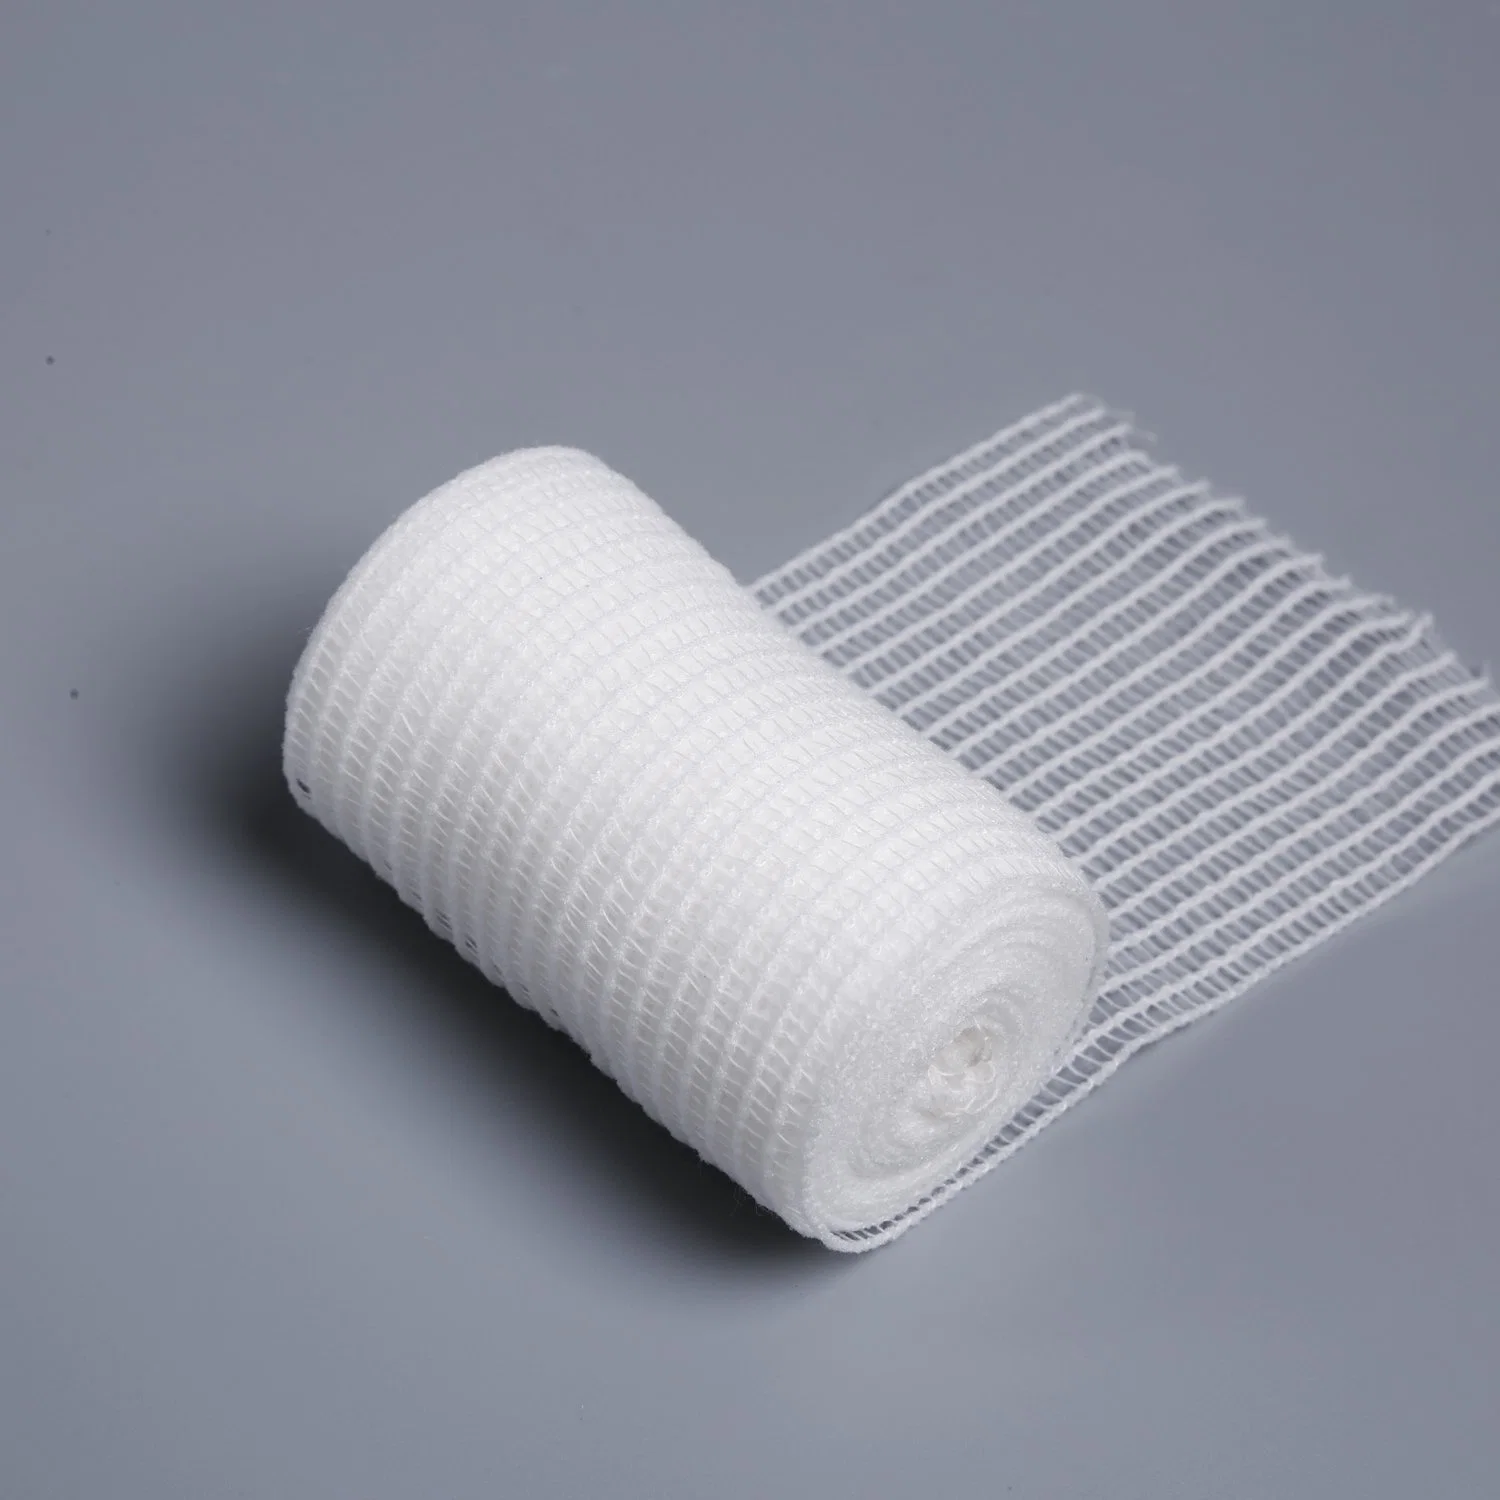 Professional Healthcare Products High Elastic Bandage Cotton First Aid Wound Care Soft Elastic Bandage